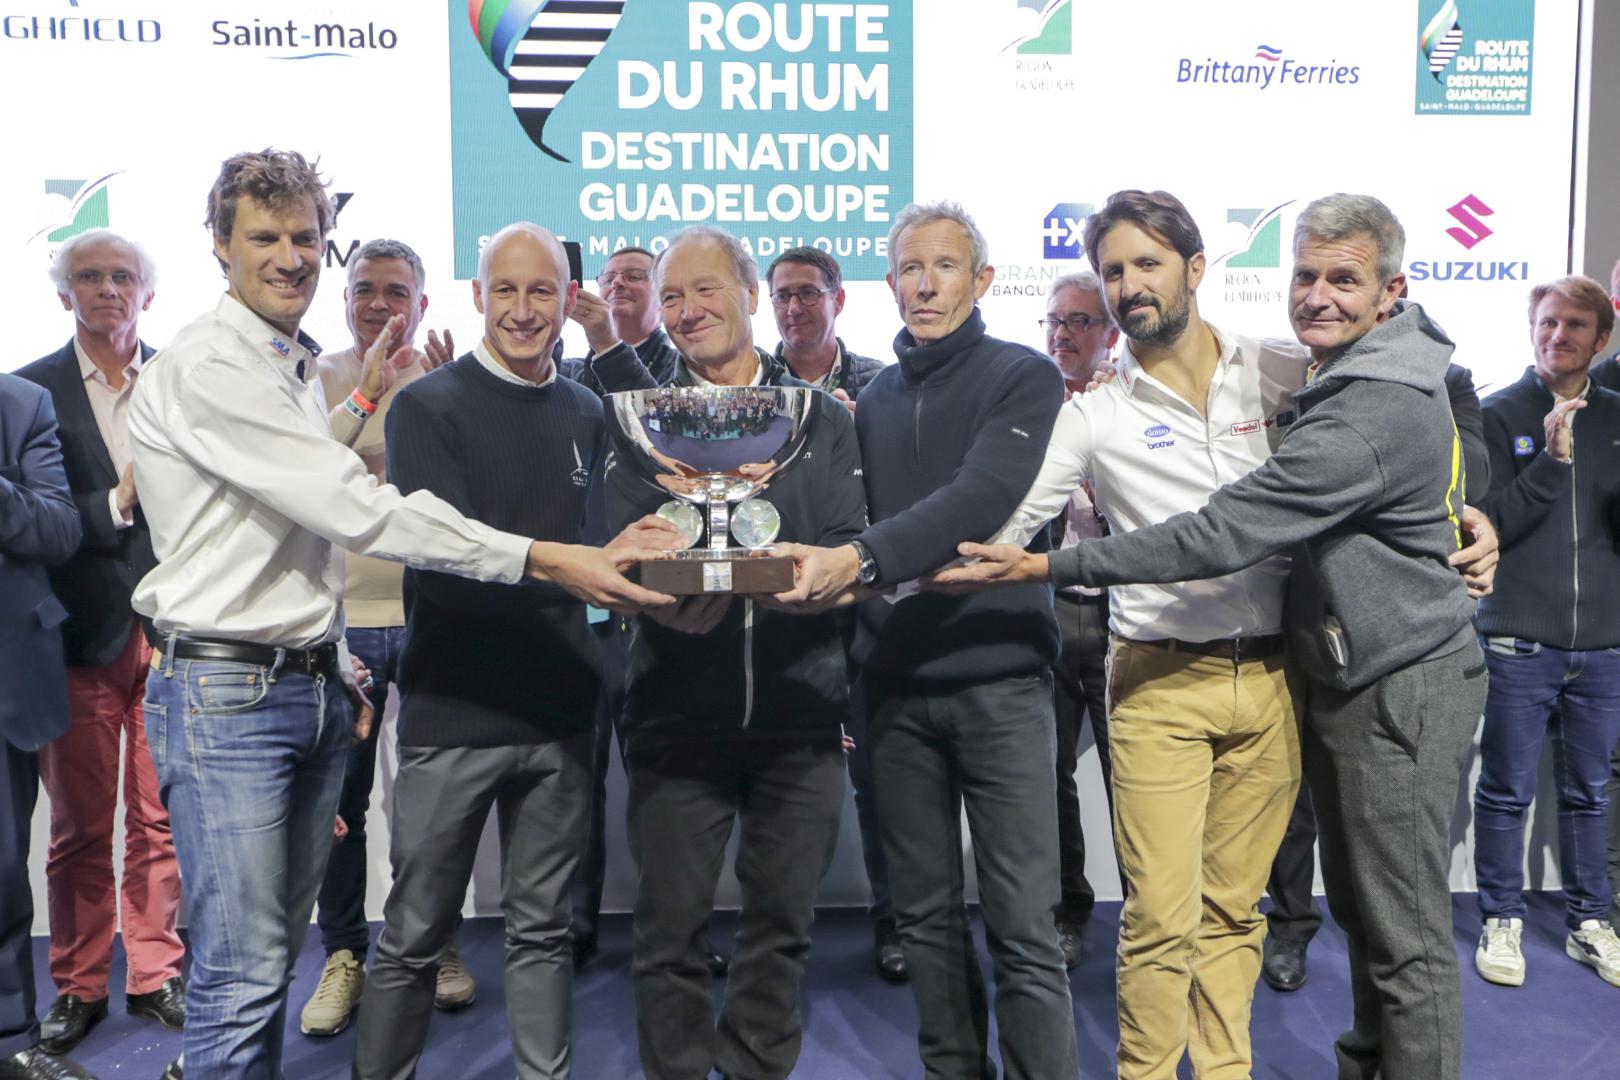 A glittering prize-giving ceremony on Friday at the Salon Nautic, the annual boat show in Paris, honoured the top performances across all the classes.